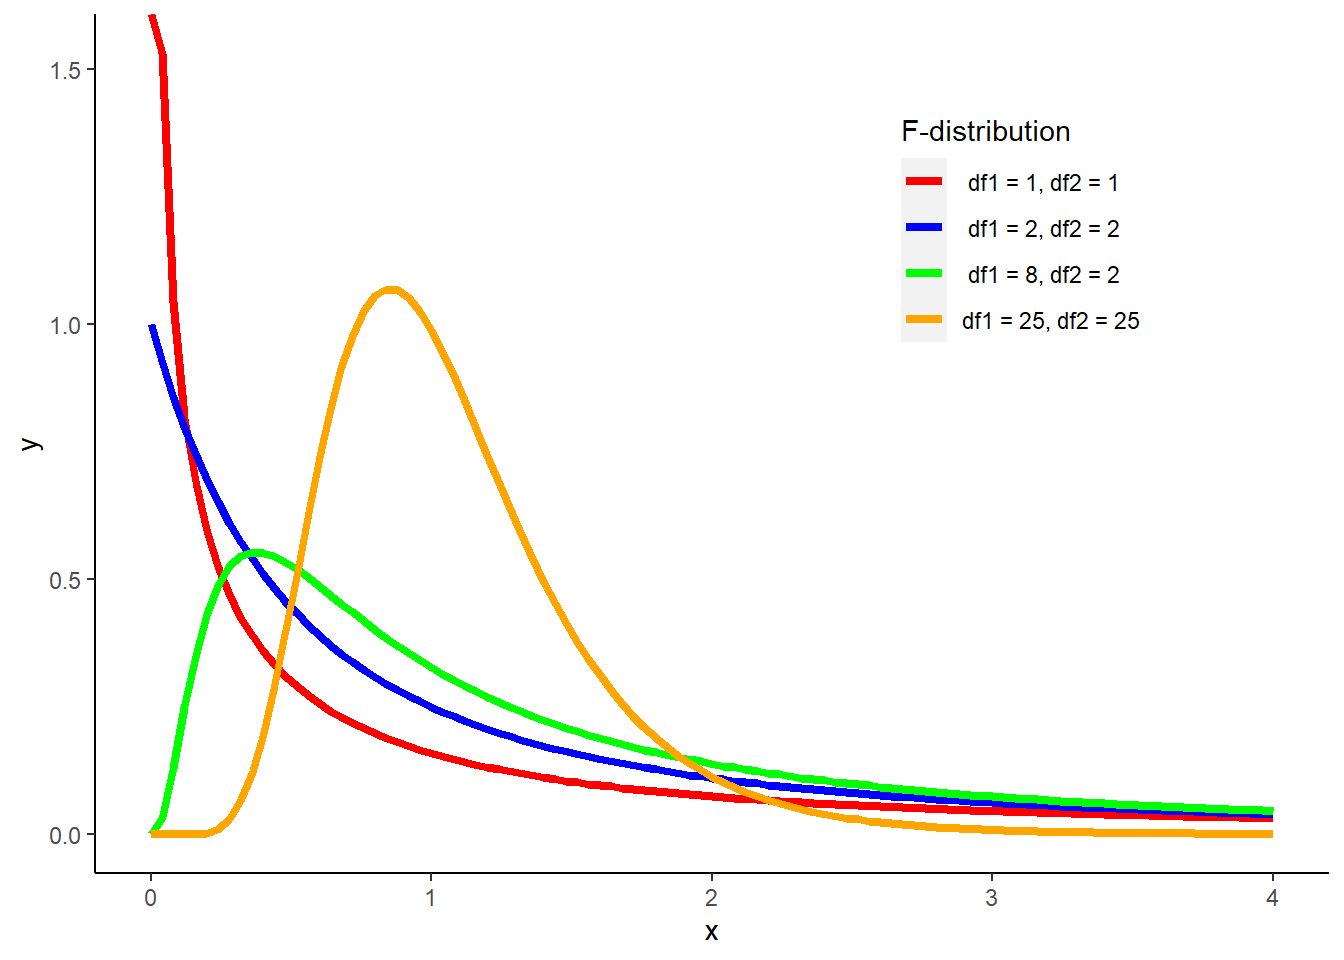 The F-distribution with varying degrees of freedom collected from two samples.